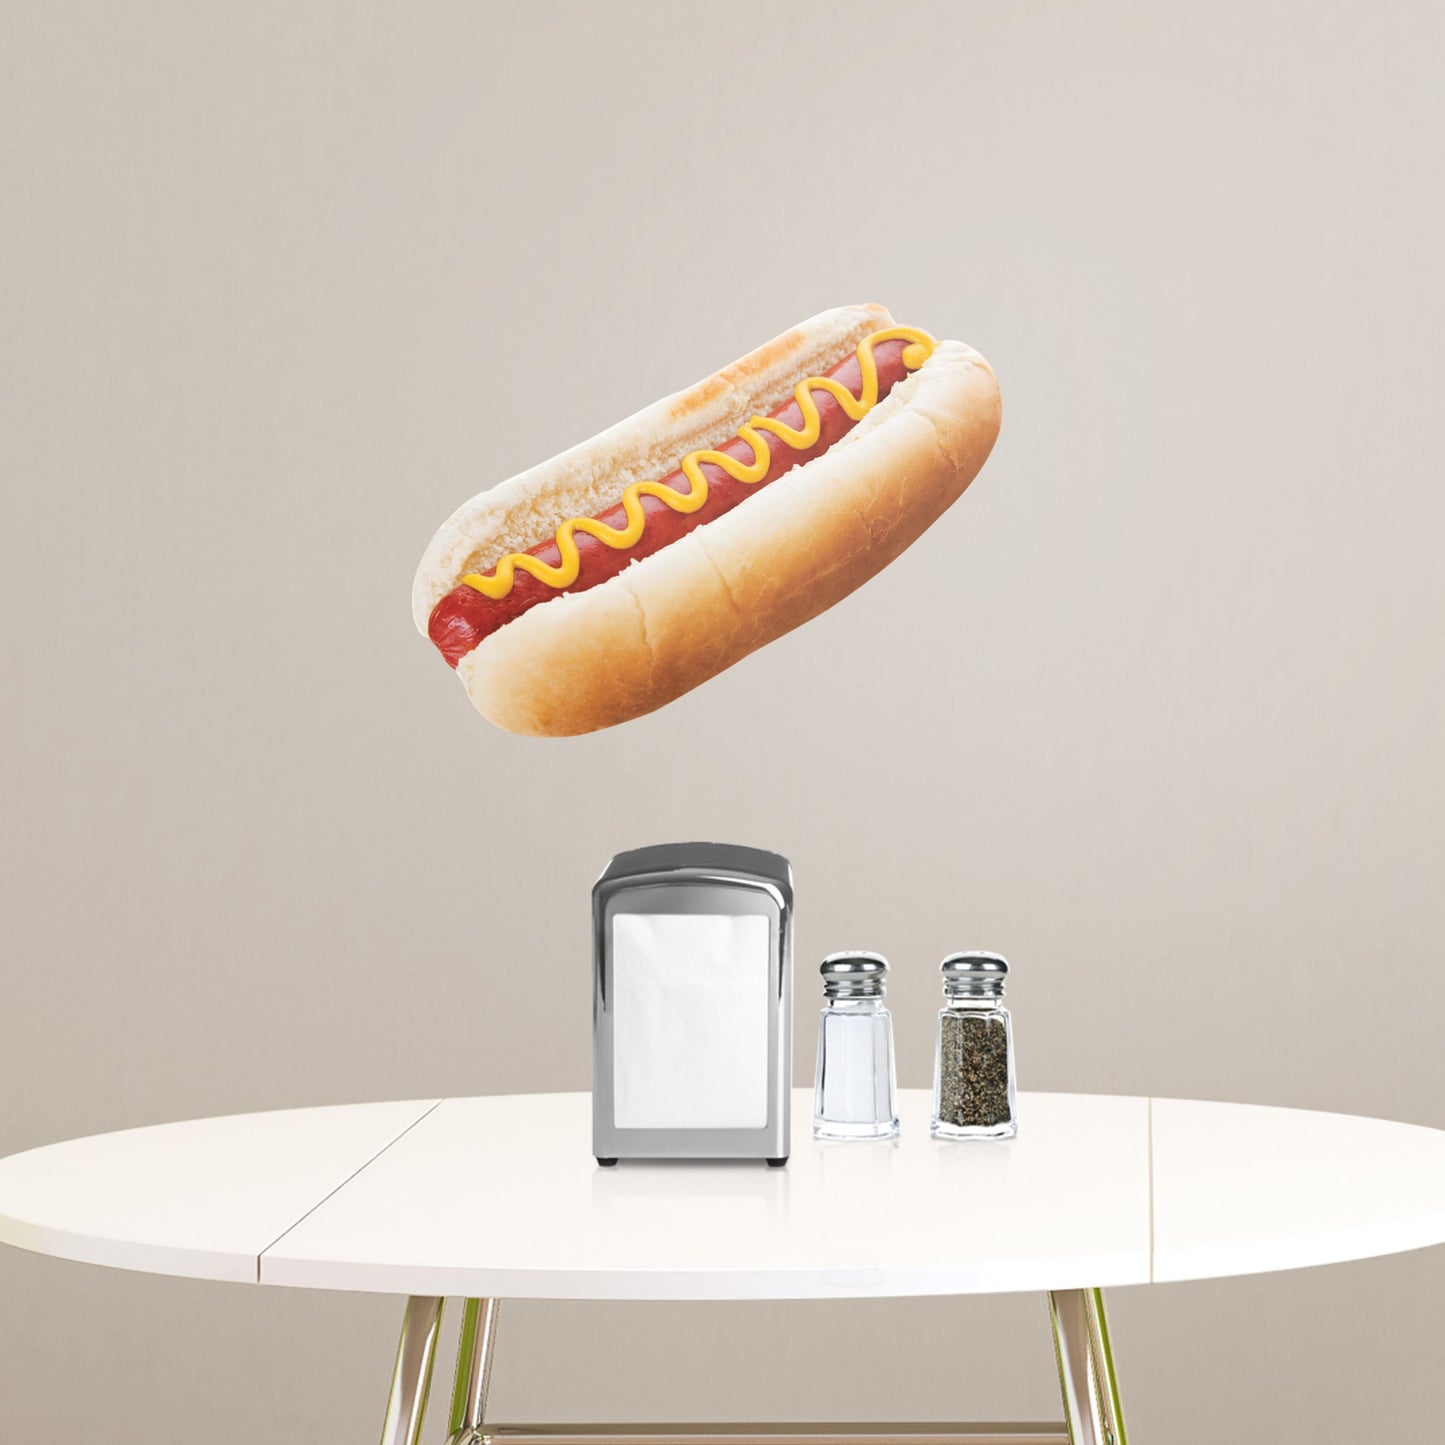 Large Hot Dog + 2 Decals (16"W x 11"H)